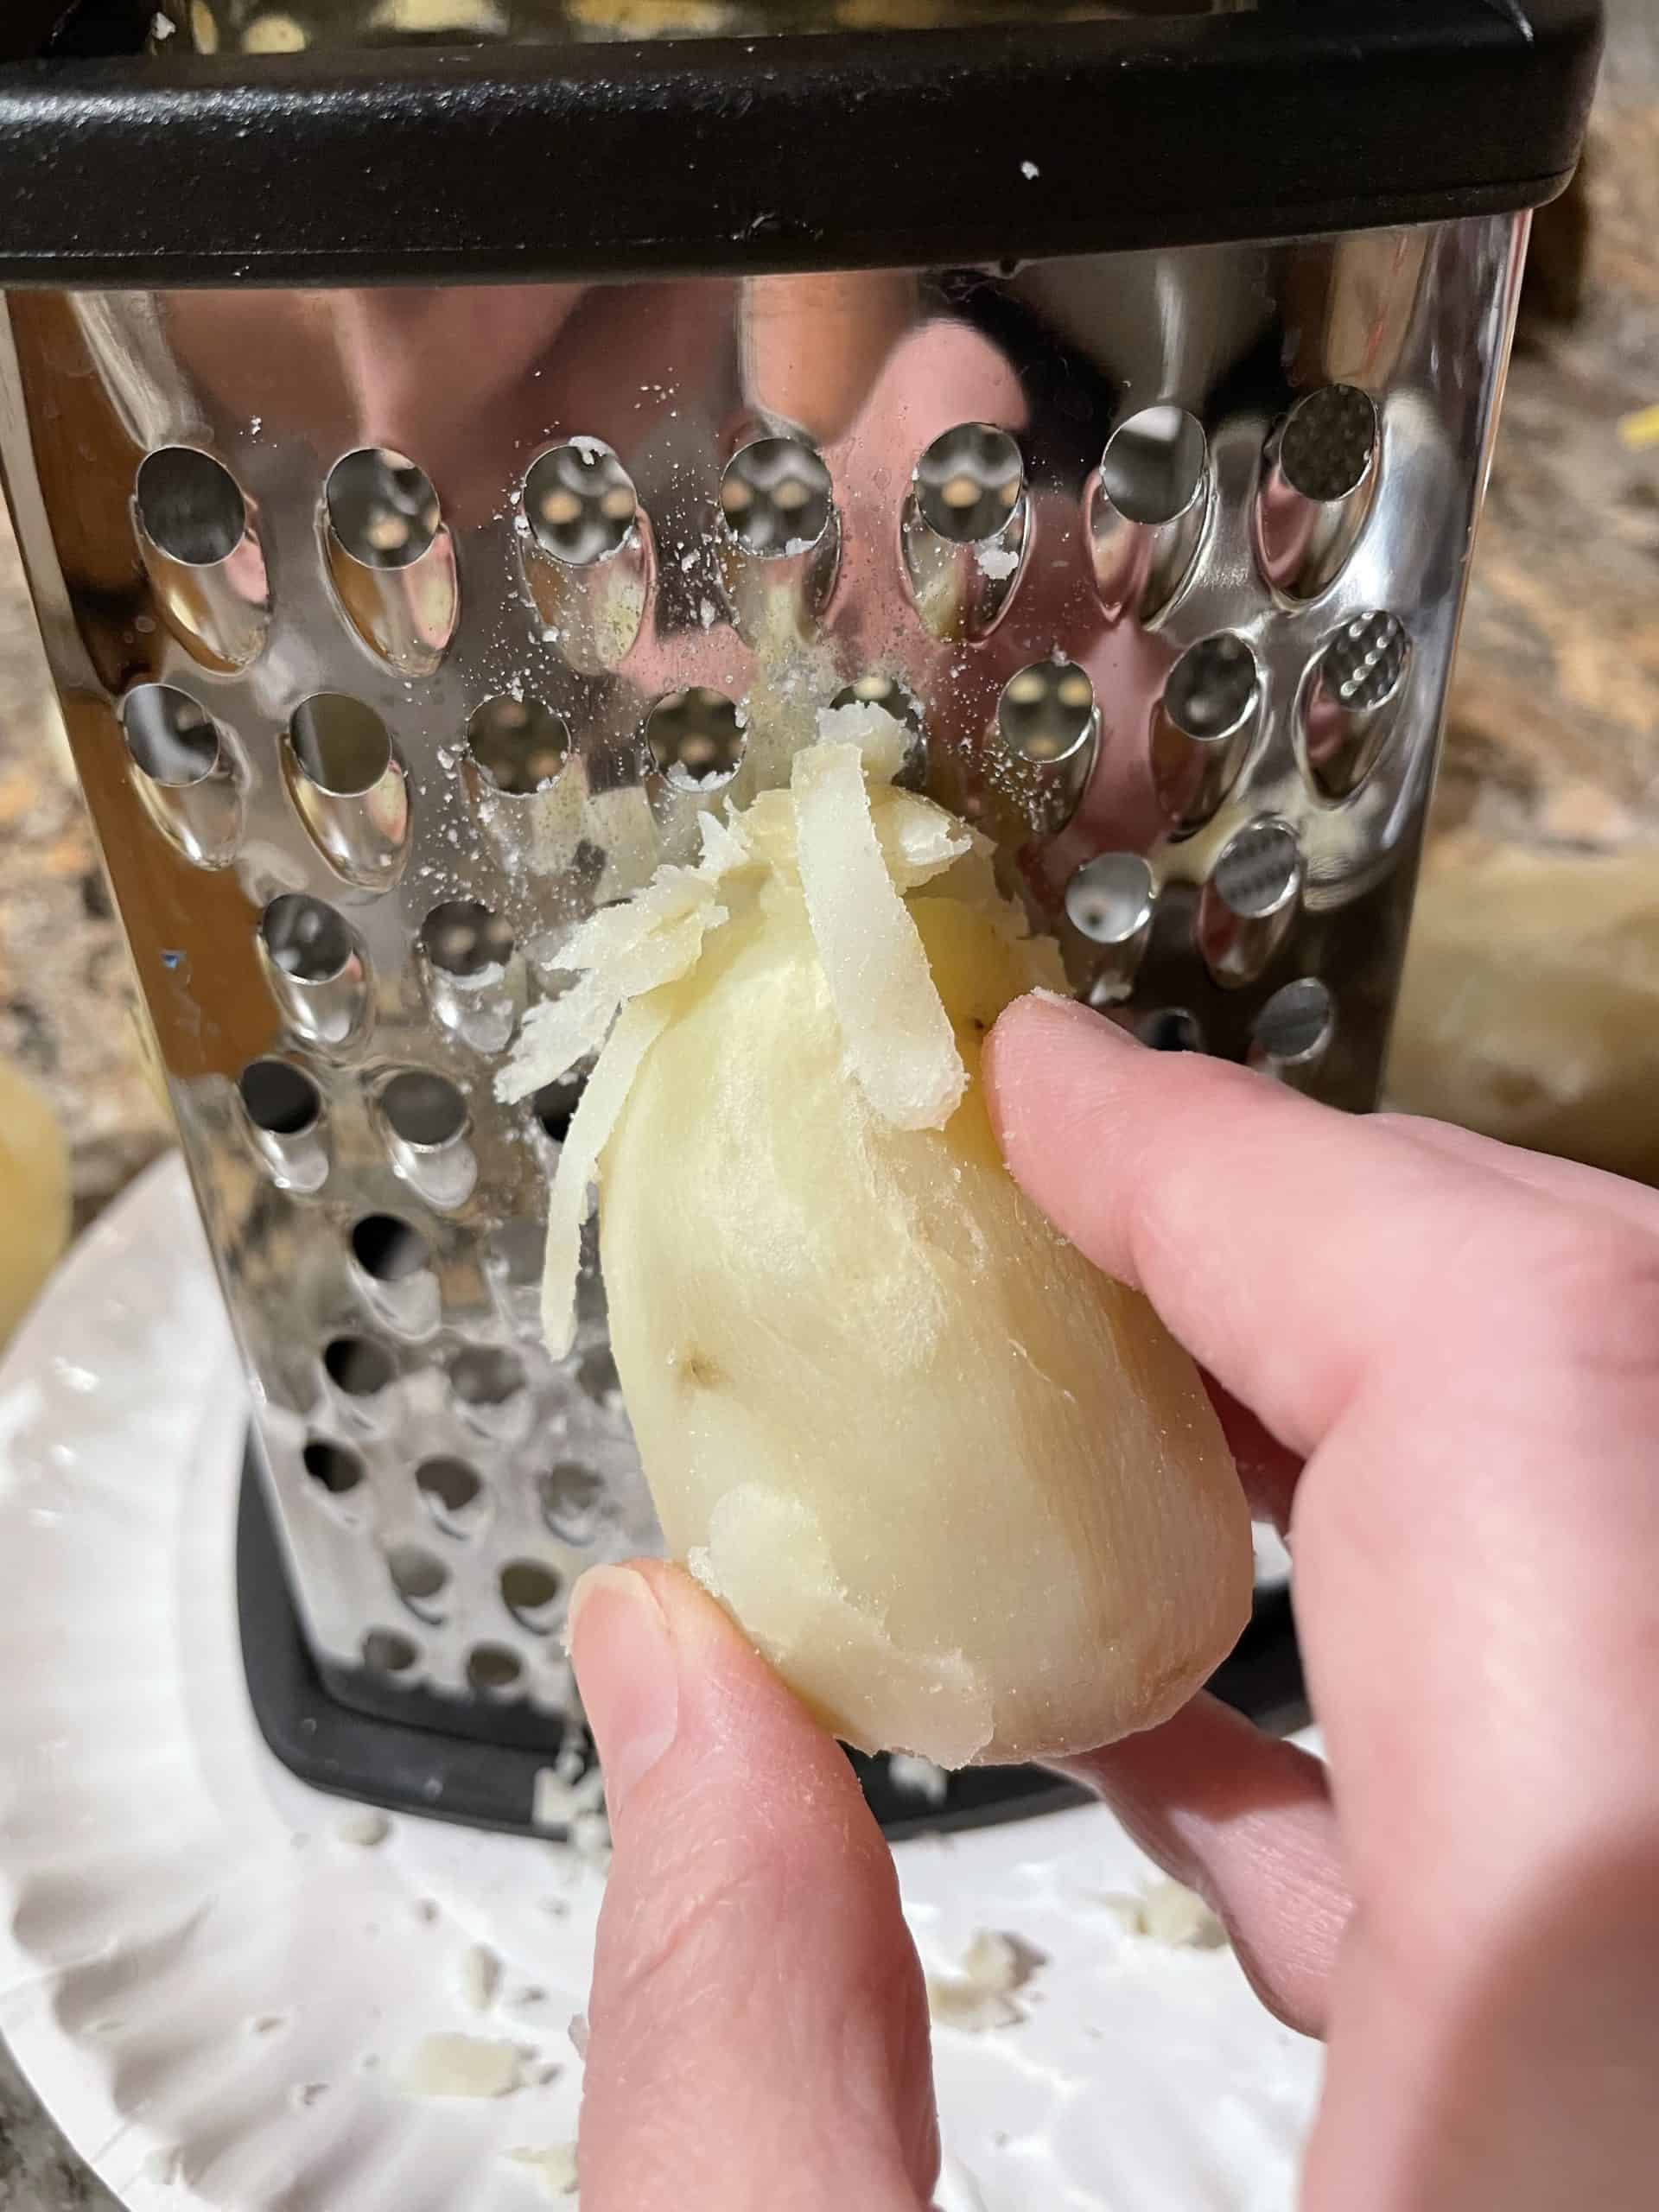 Shredding Peeled, Boiled Potatoes with a Box Grater.